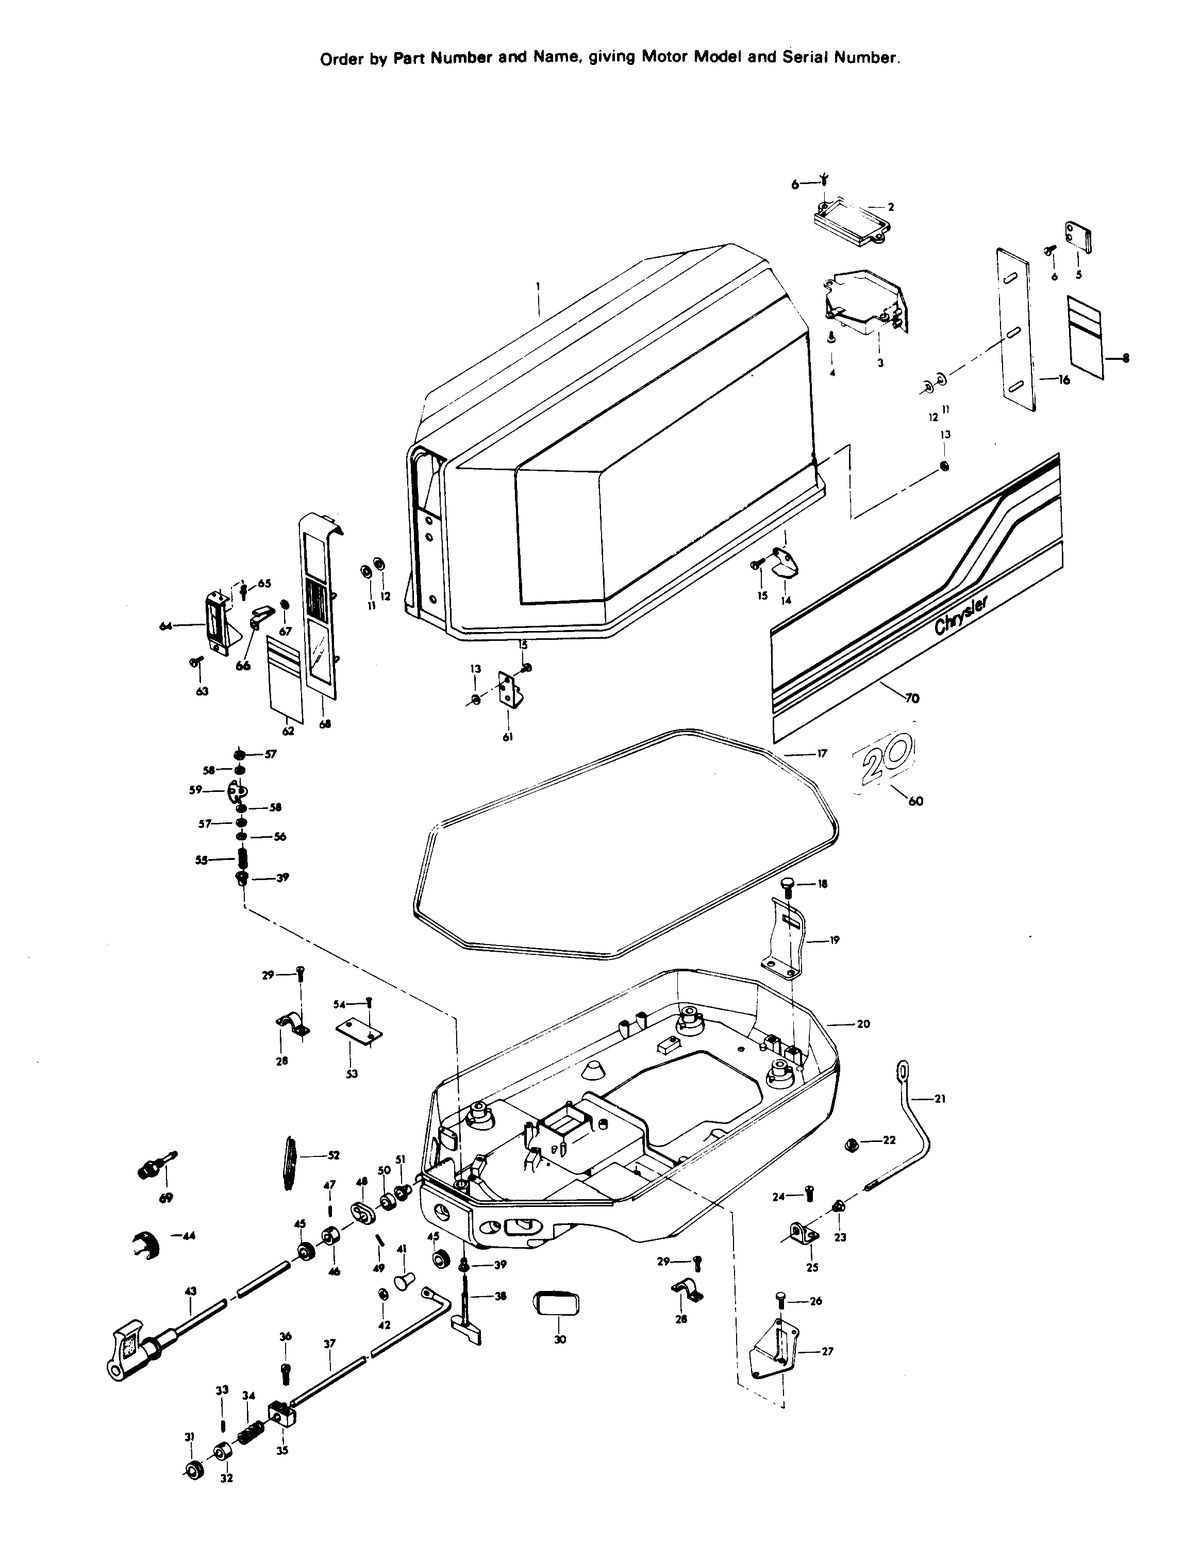 CHRYSLER 20 H.P. ENGINE COVER AND SUPPORT PLATE